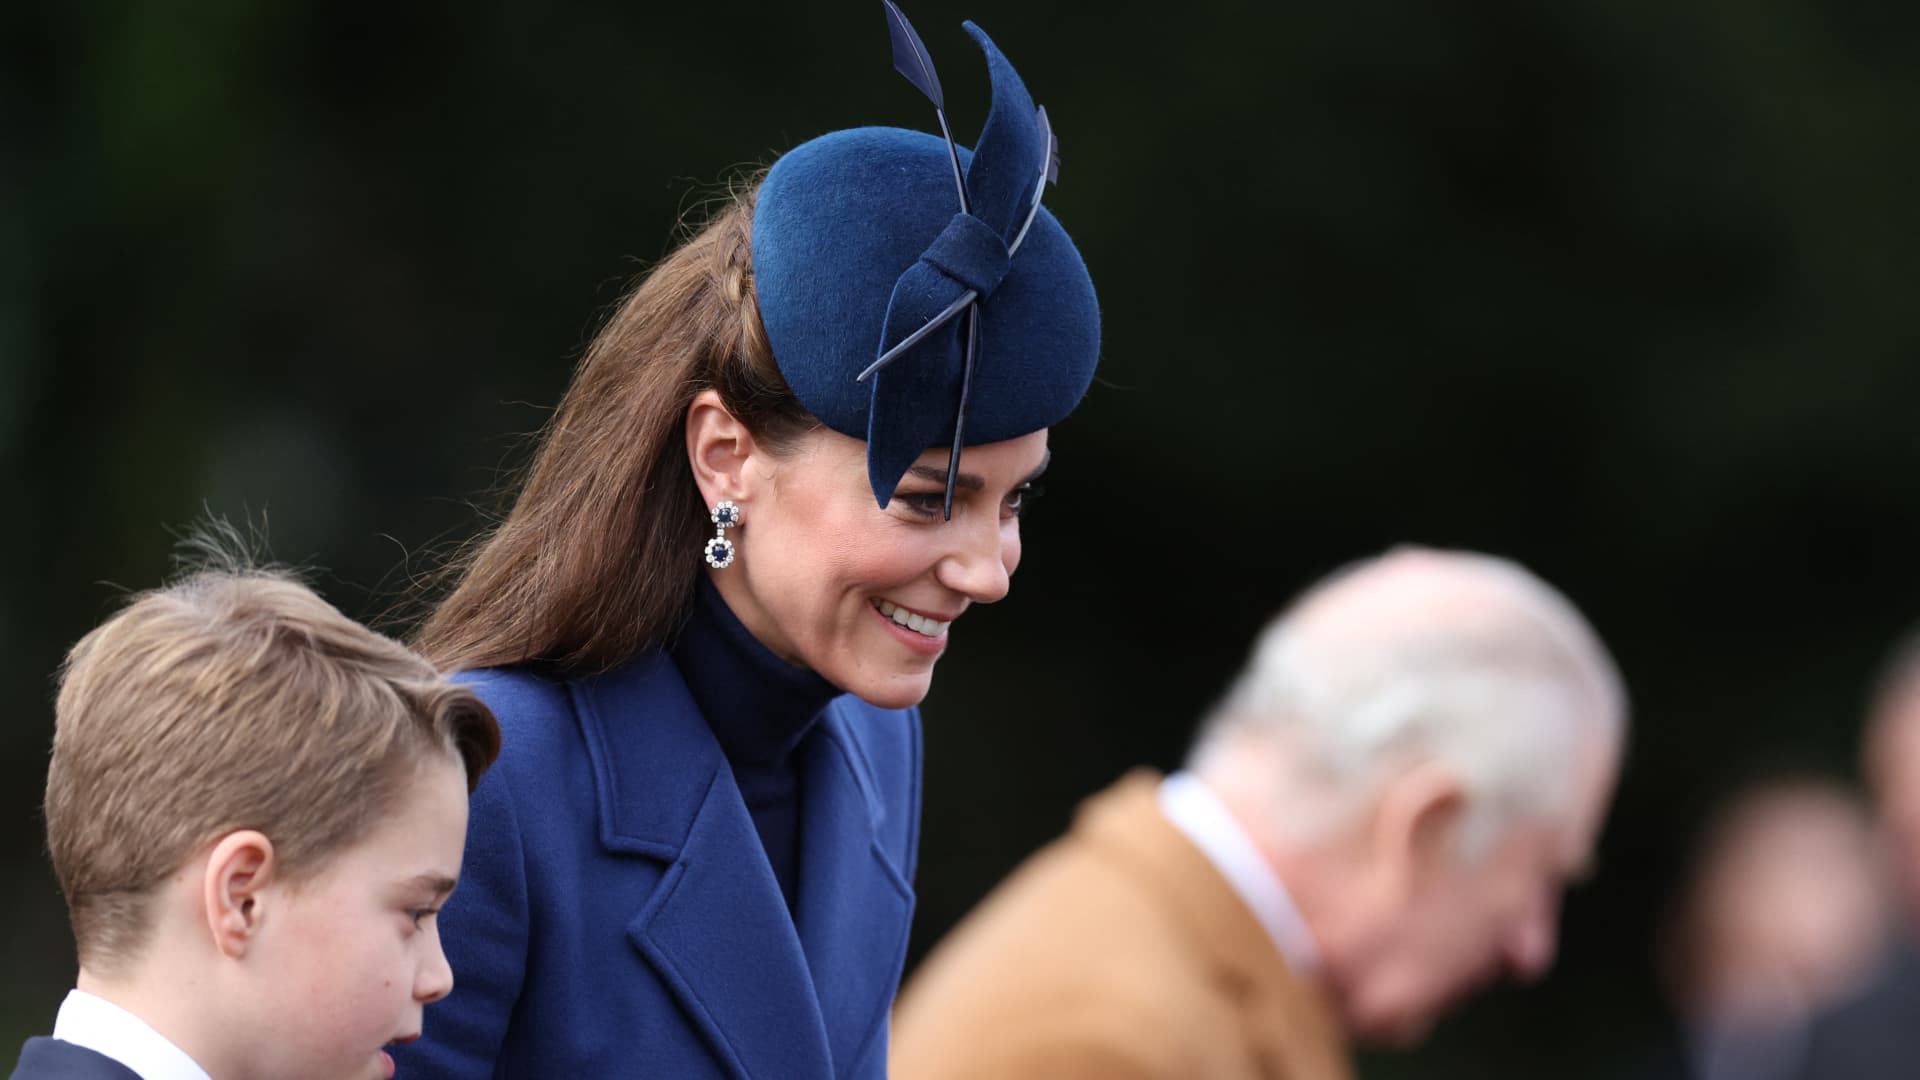 Princess of Wales Kate Middleton reveals she is in the early stages of cancer treatment